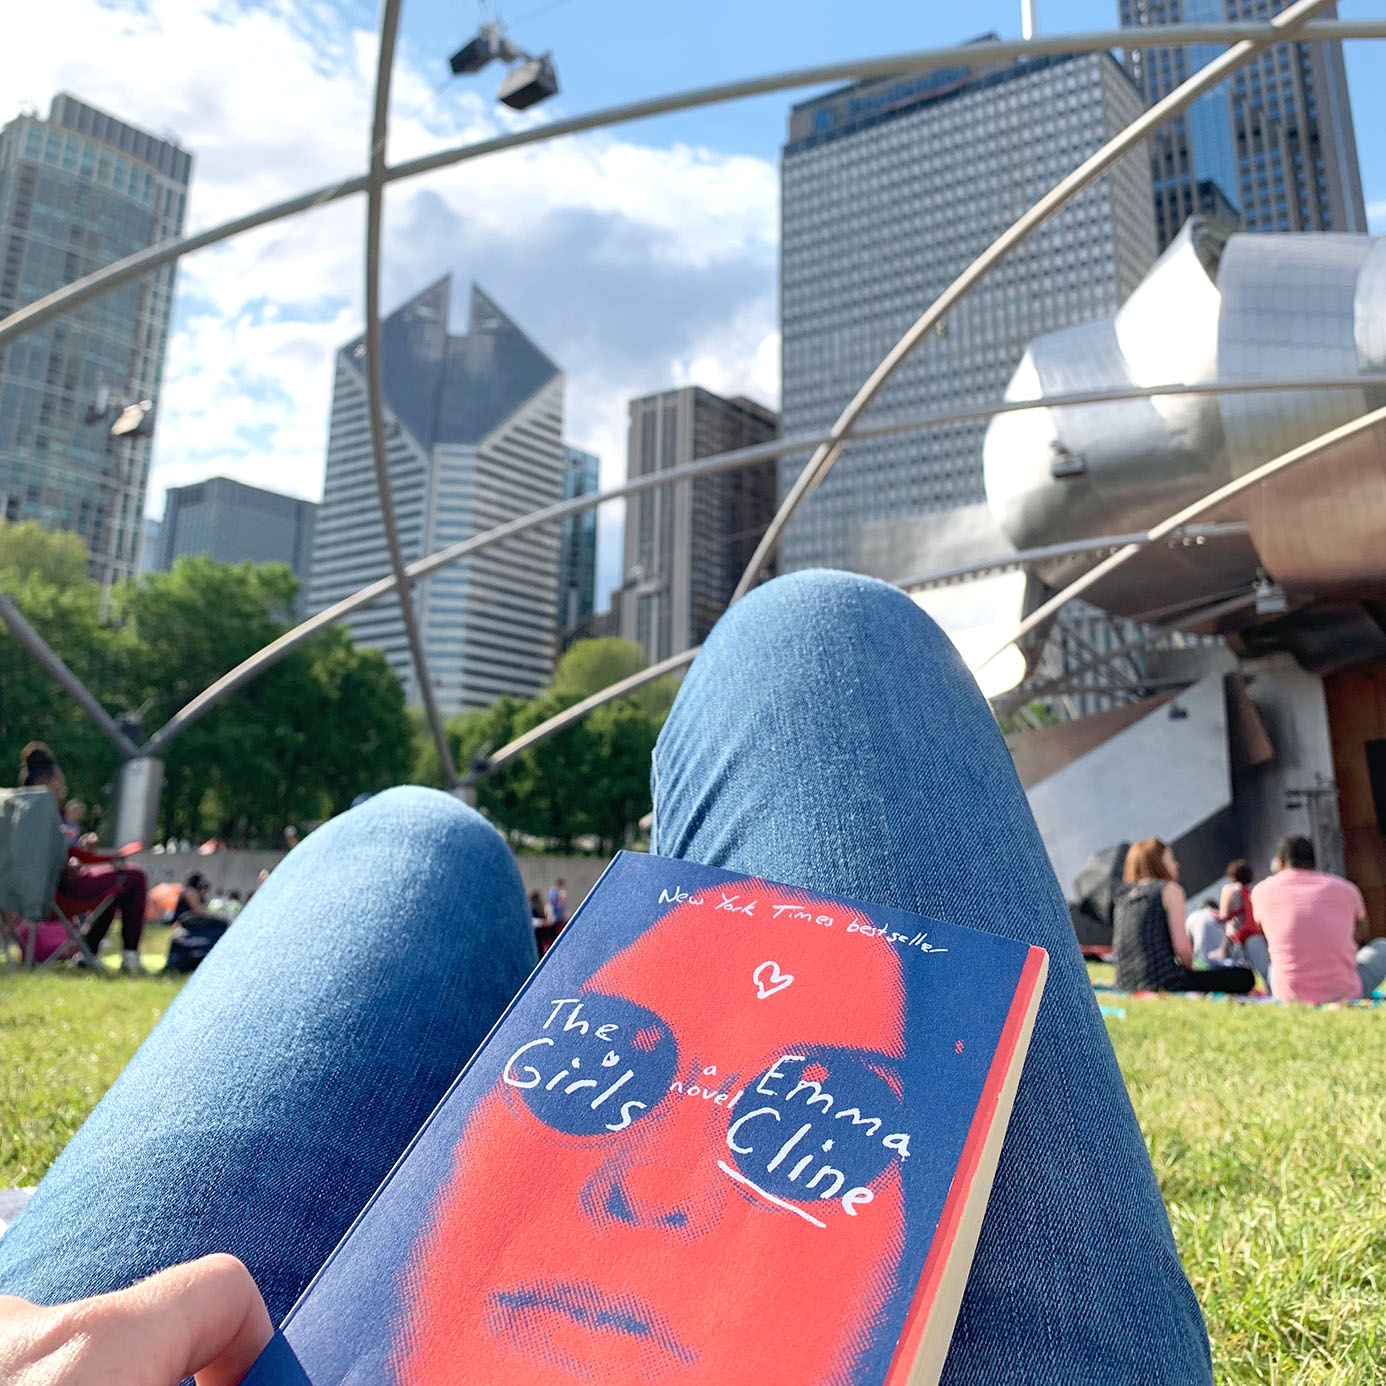 Reading a book in the park in Chicago